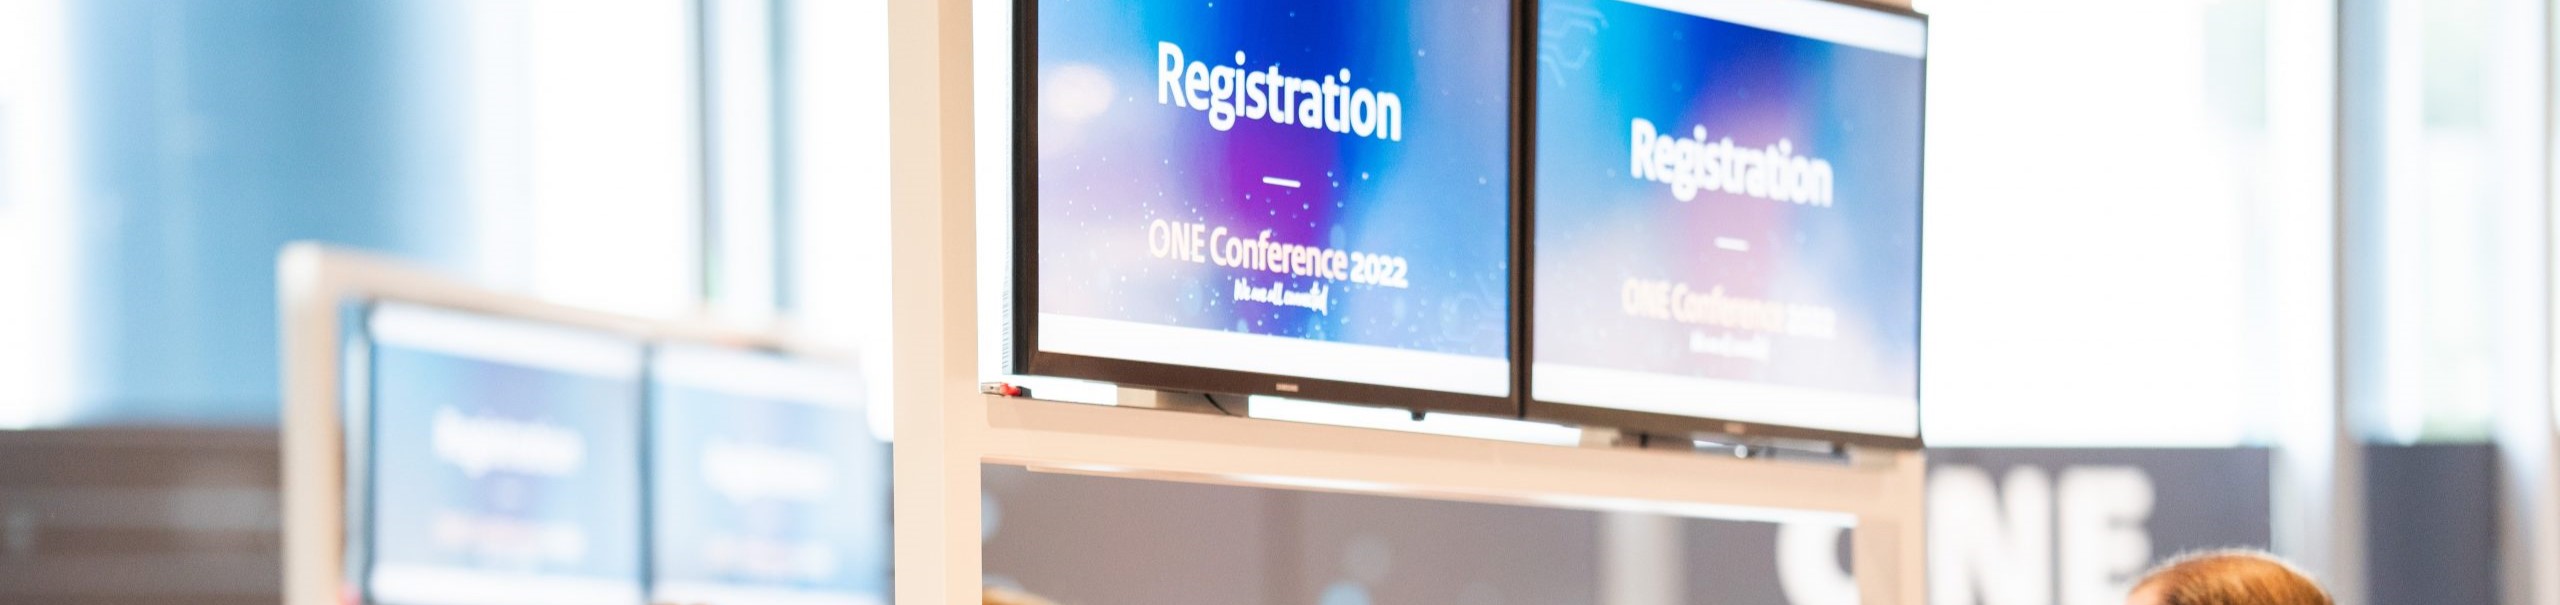 Registration screens at the ONE Conference